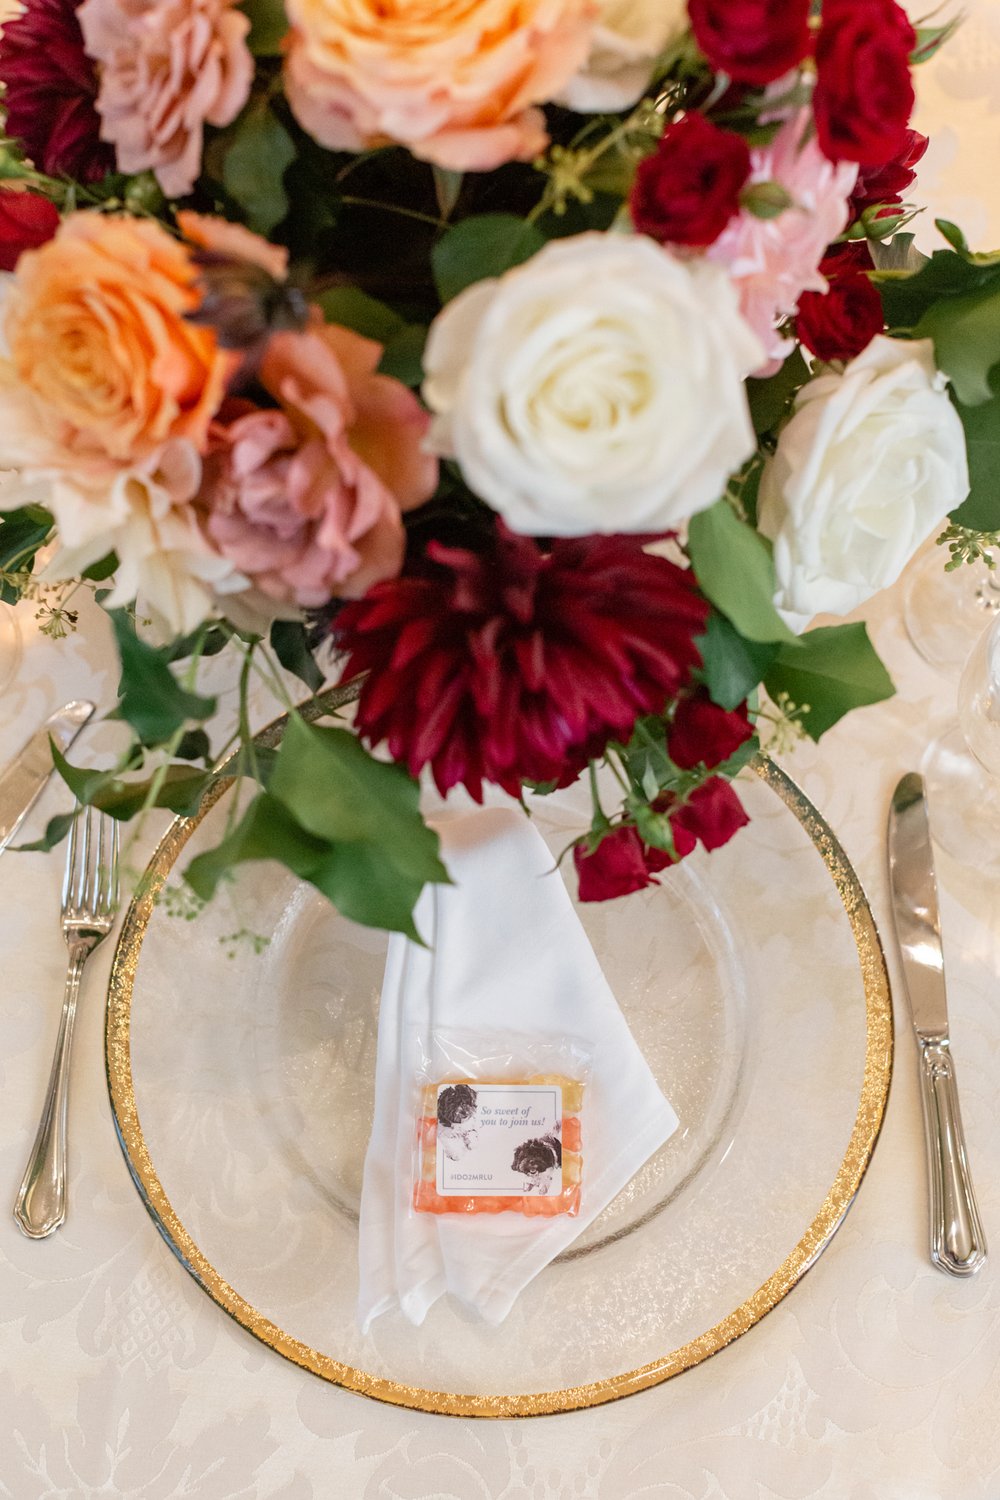 Jessica and Andrew’s Romantic and Dreamy Autumn Wedding at Mer